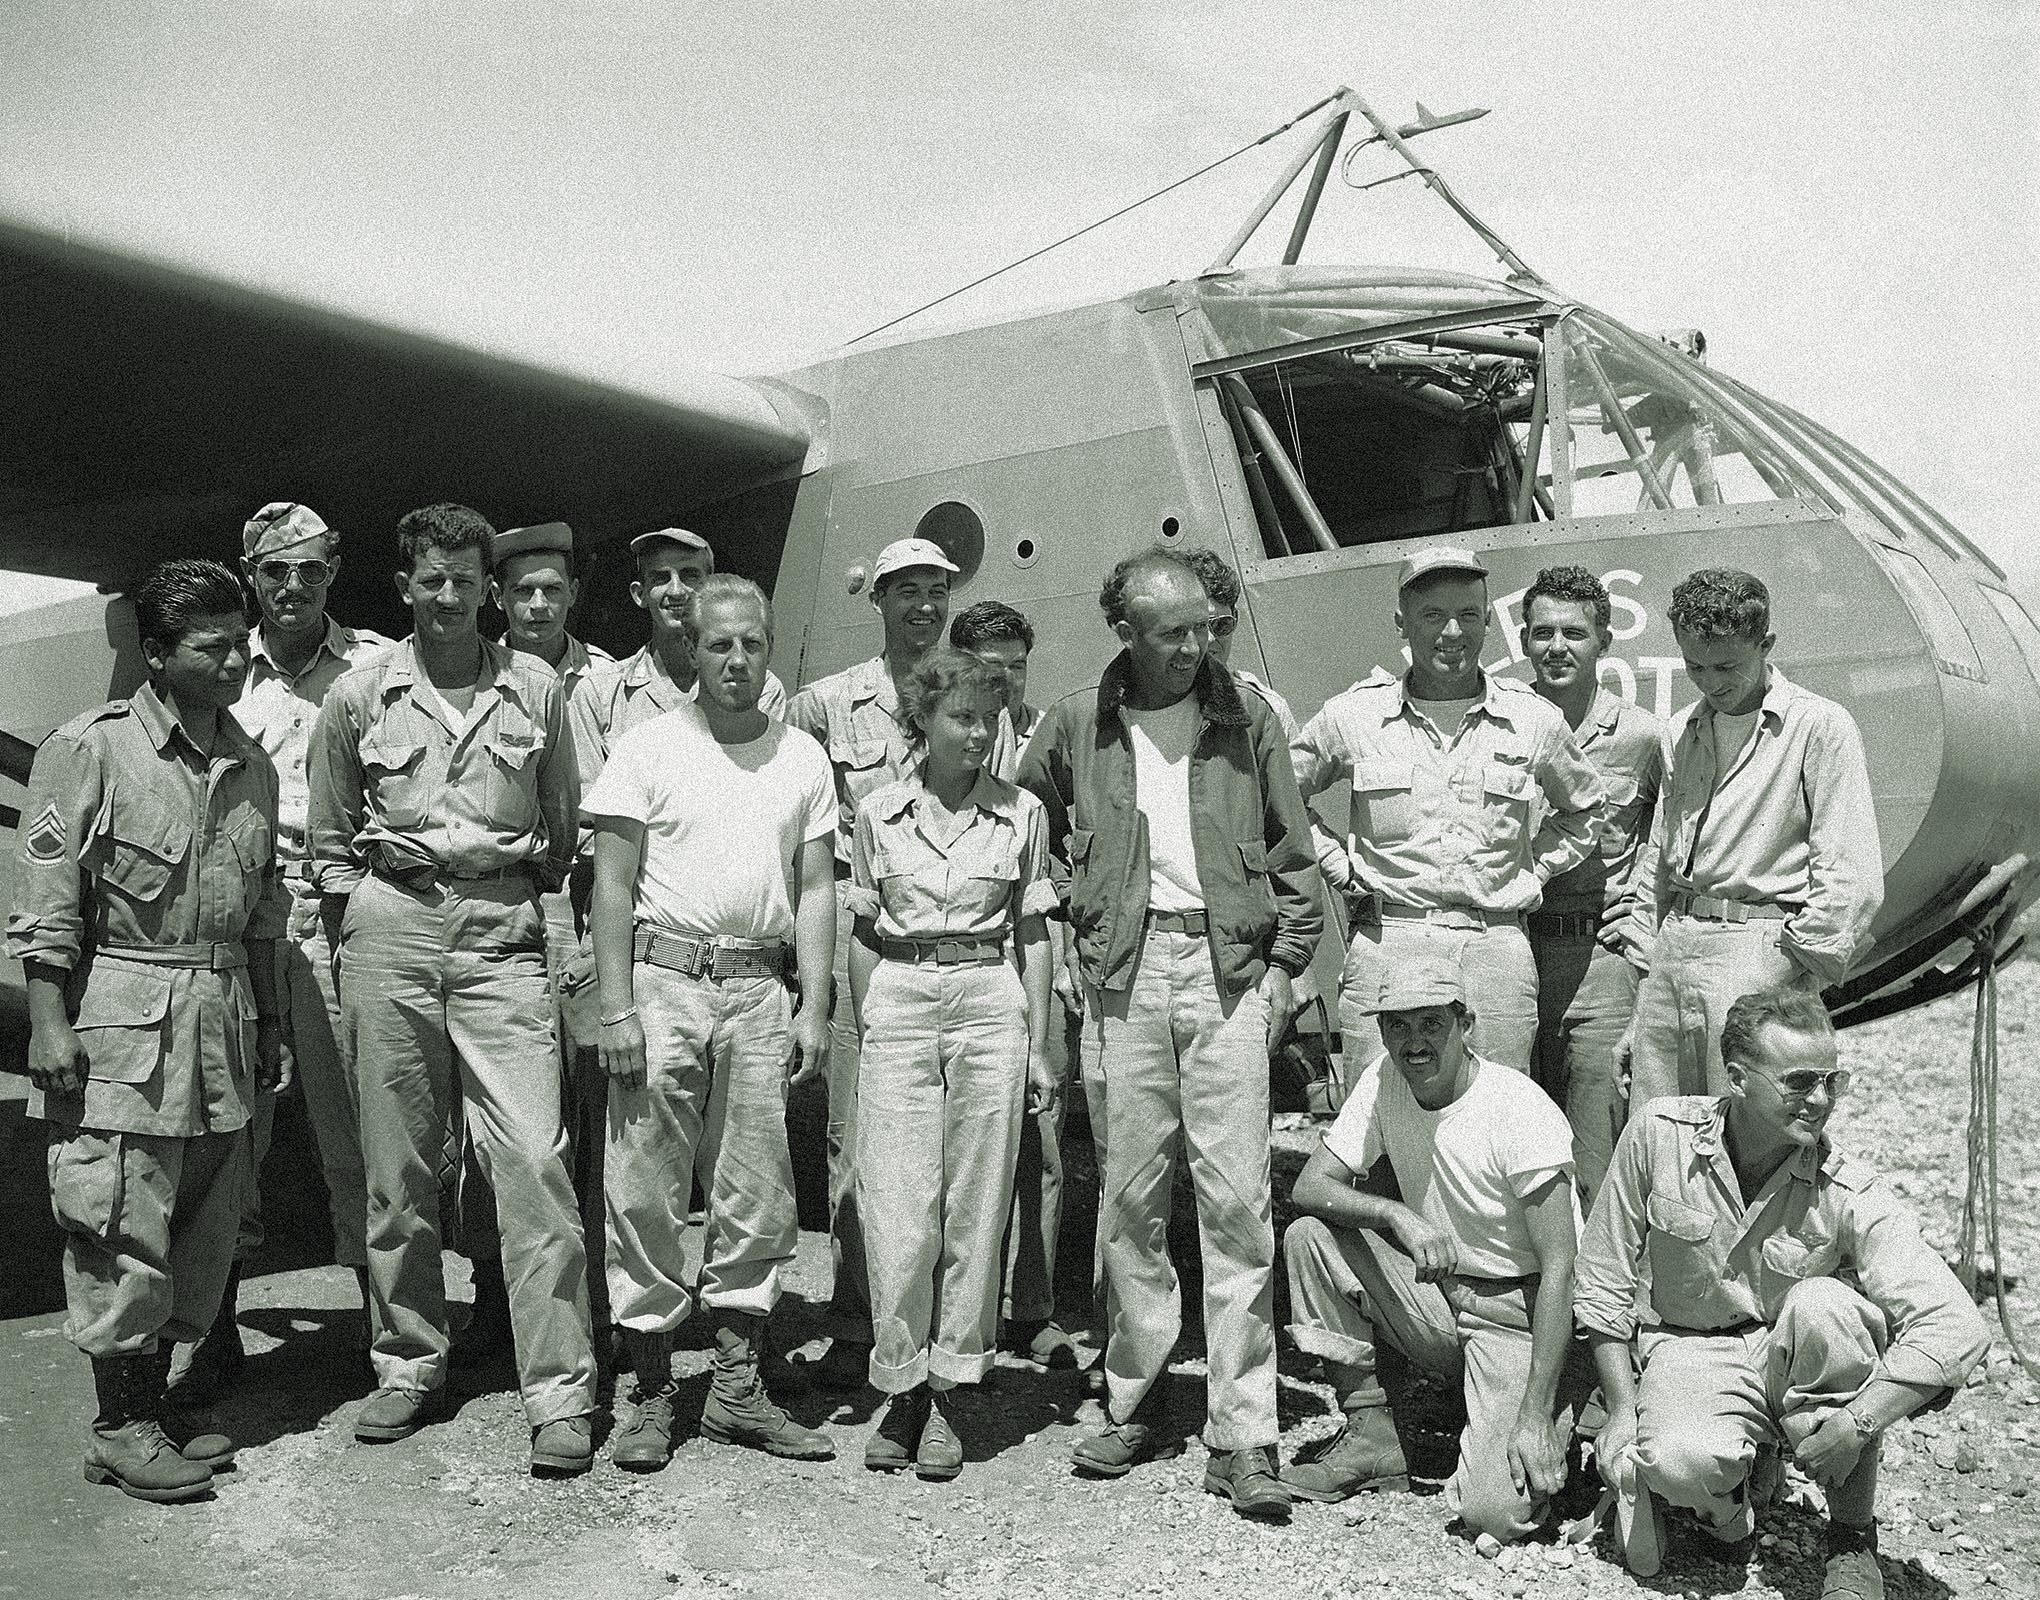 McCollom, Hastings and Decker (at center from left) and members of the rescue team pose for a group photo in front of the Waco CG-4A glider. / Frank Filan, Associated Press